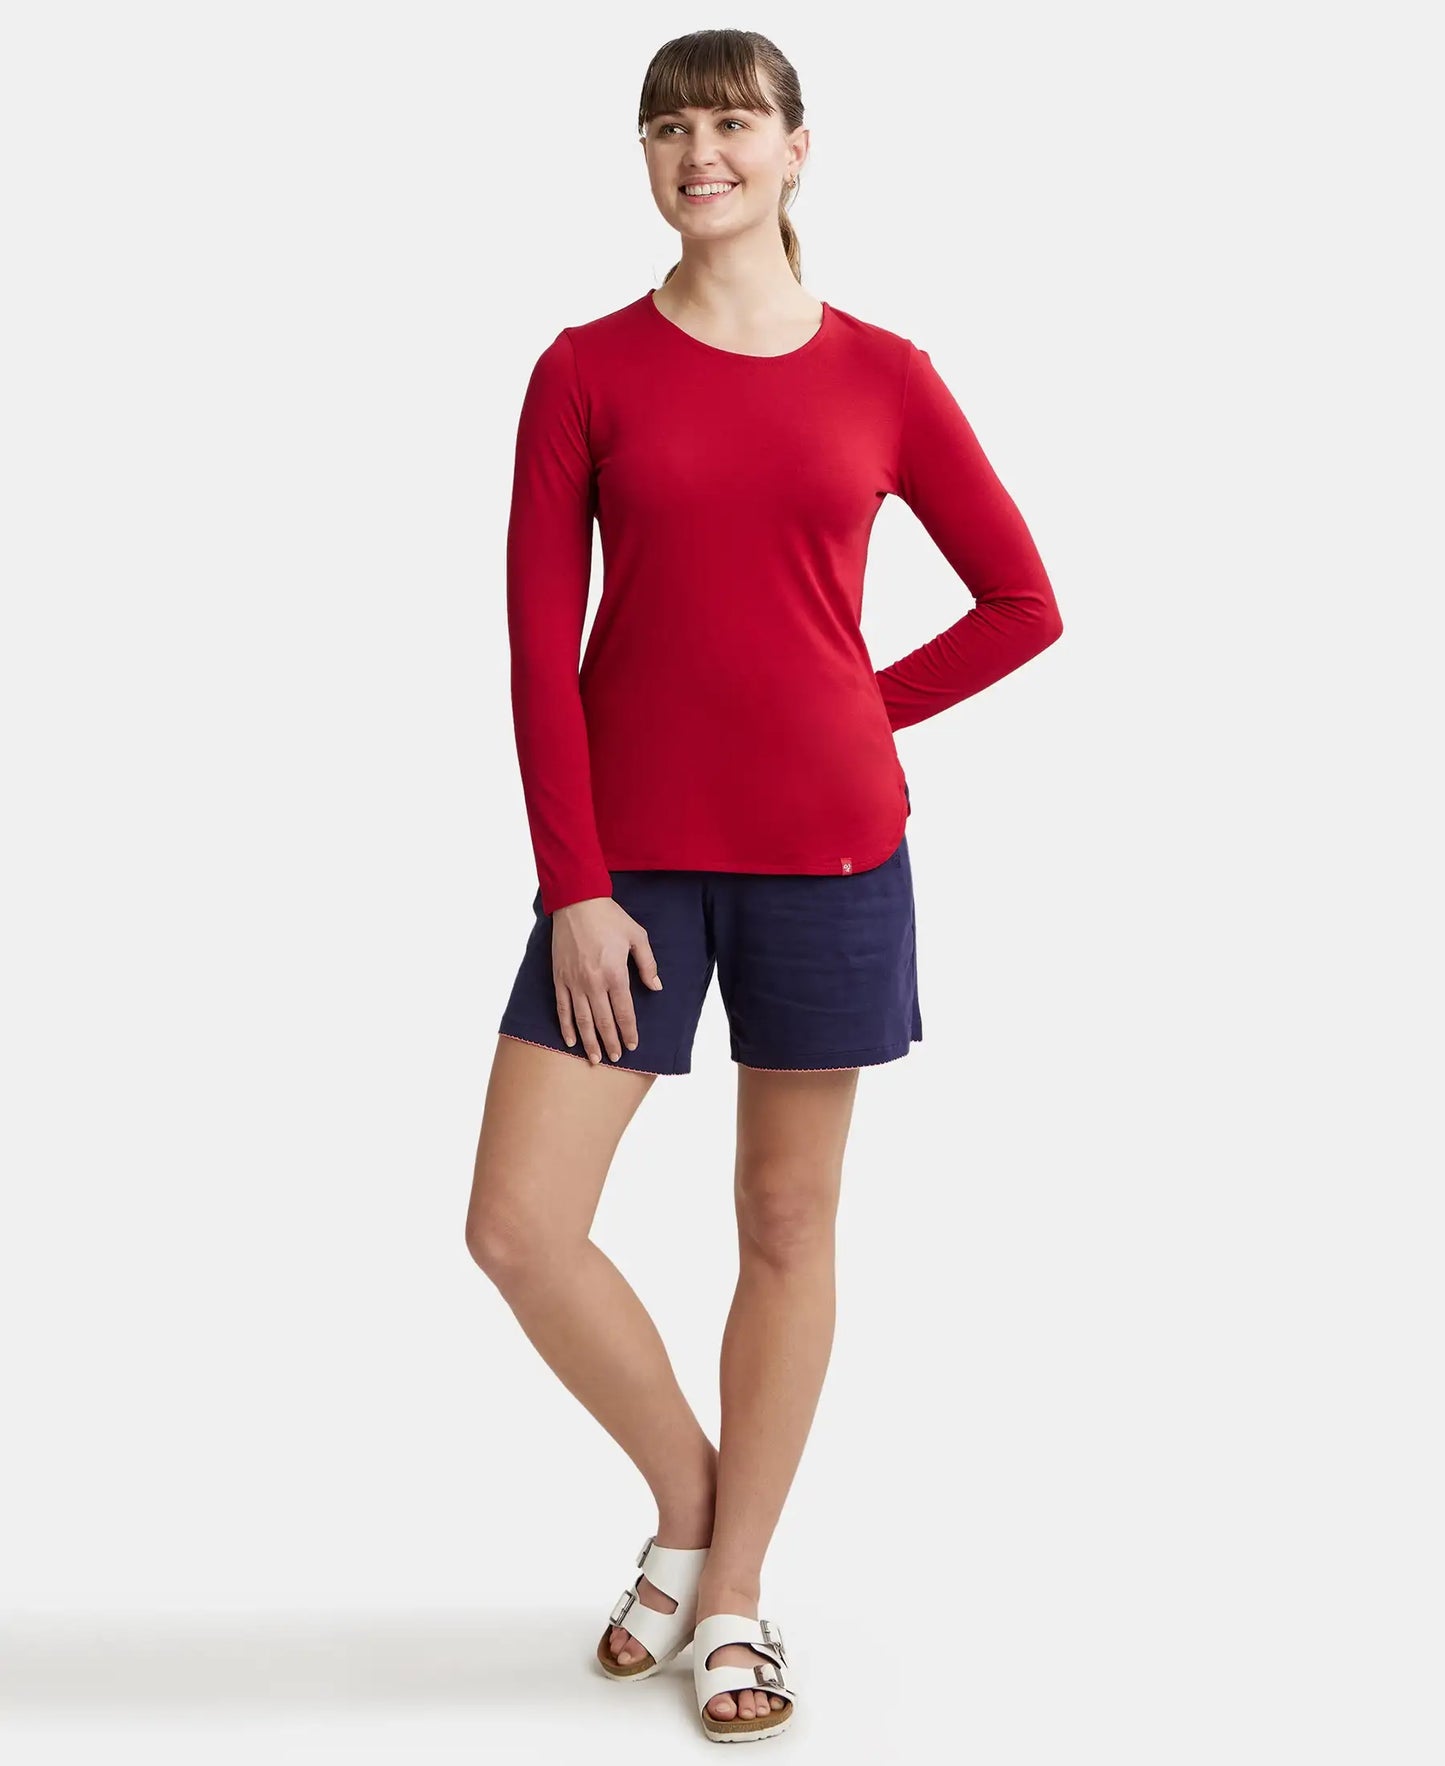 Micro Modal Cotton Relaxed Fit Solid Round Neck Full Sleeve T-Shirt with Curved Hem Styling - Jester Red-4